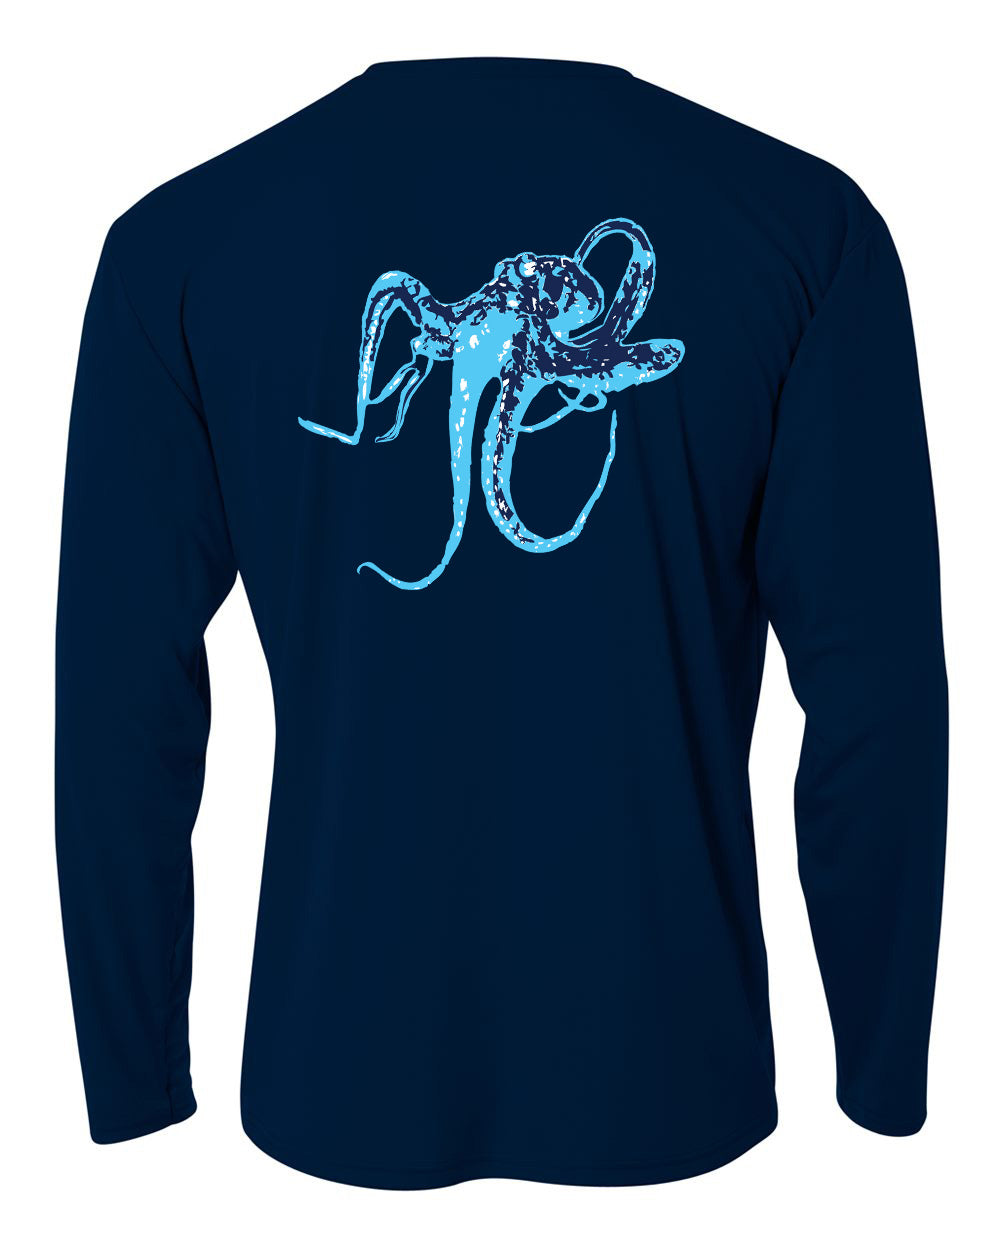 Youth Performance Long & Short Sleeve Shirts -Hogfish, Crab, Turtle, Lobster